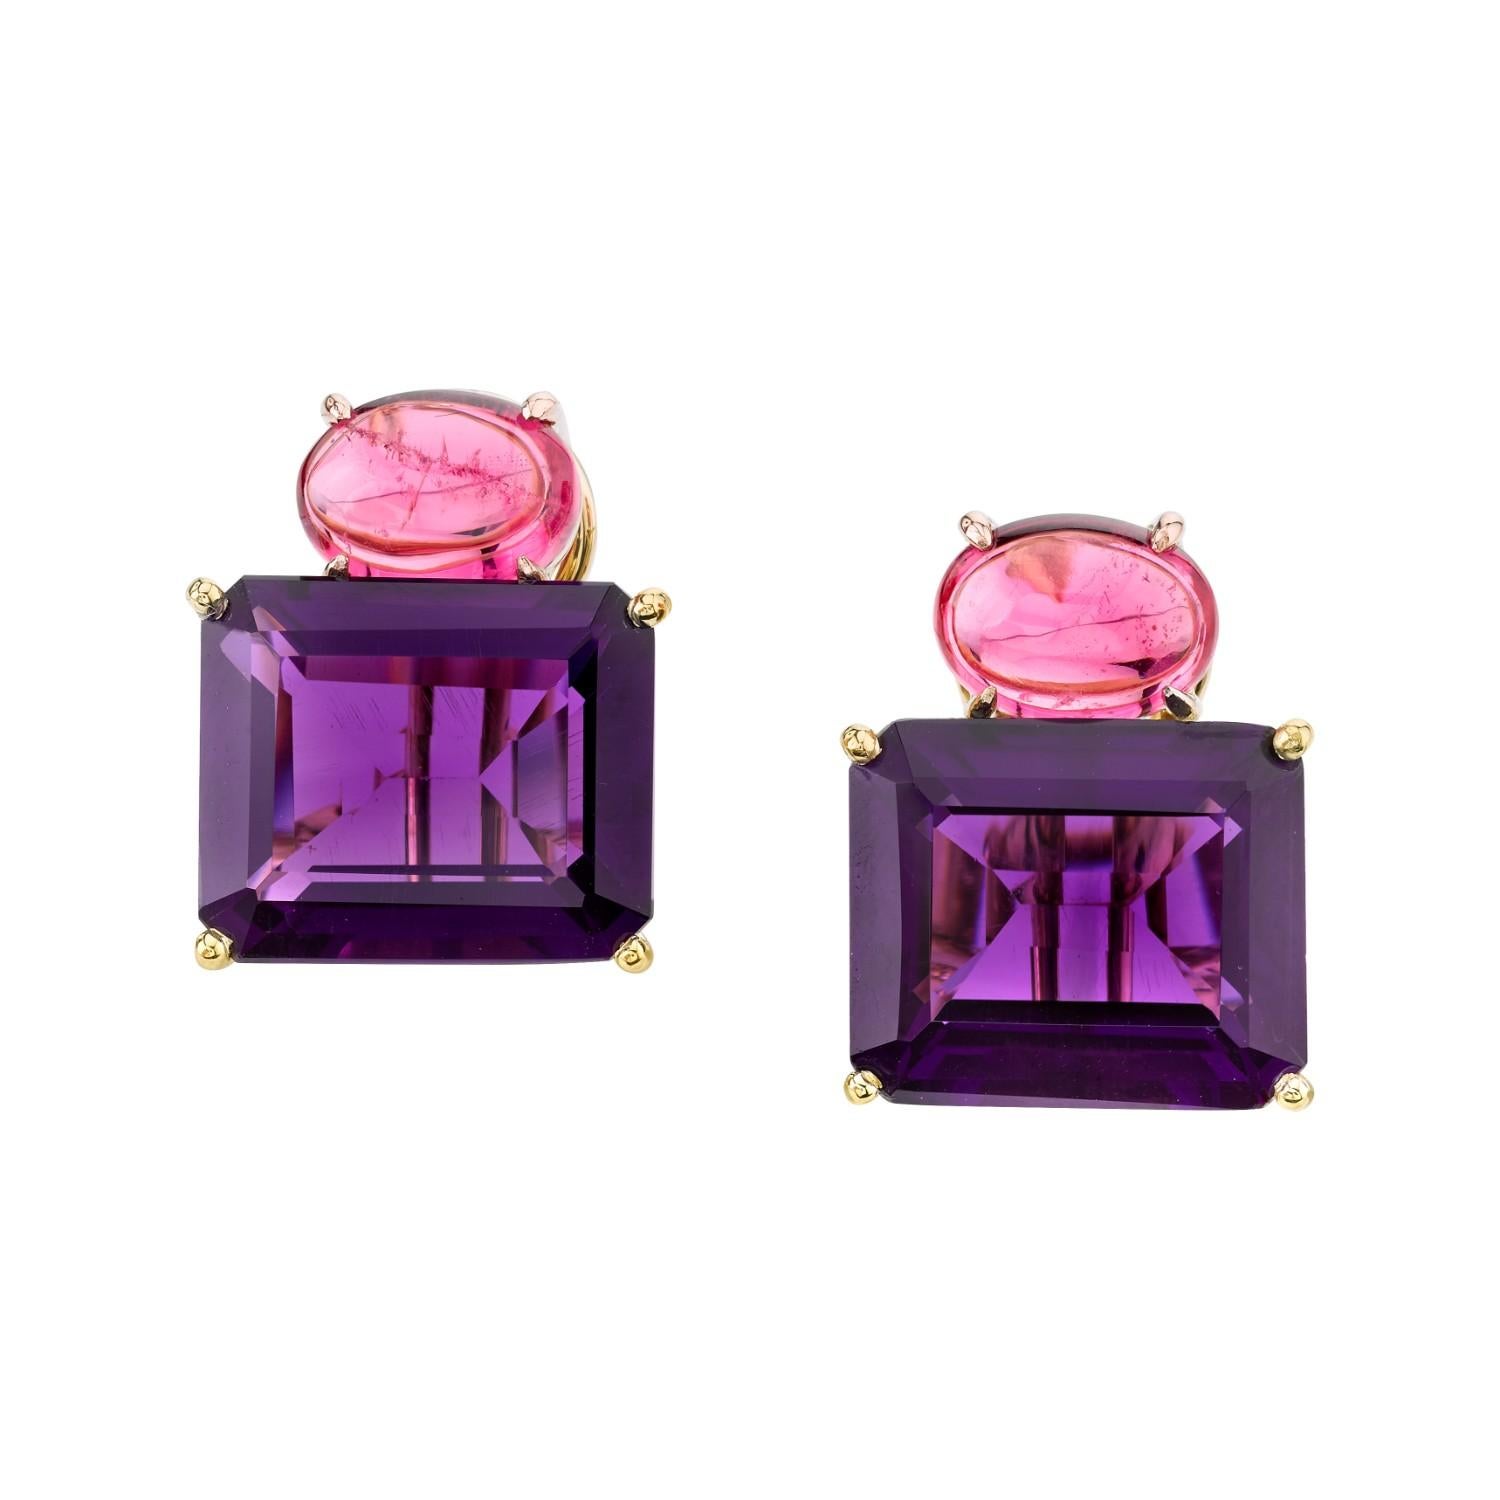 15.51 ct. t.w. Amethyst and Pink Spinel Cabochon 18k Gold French Clip Earrings